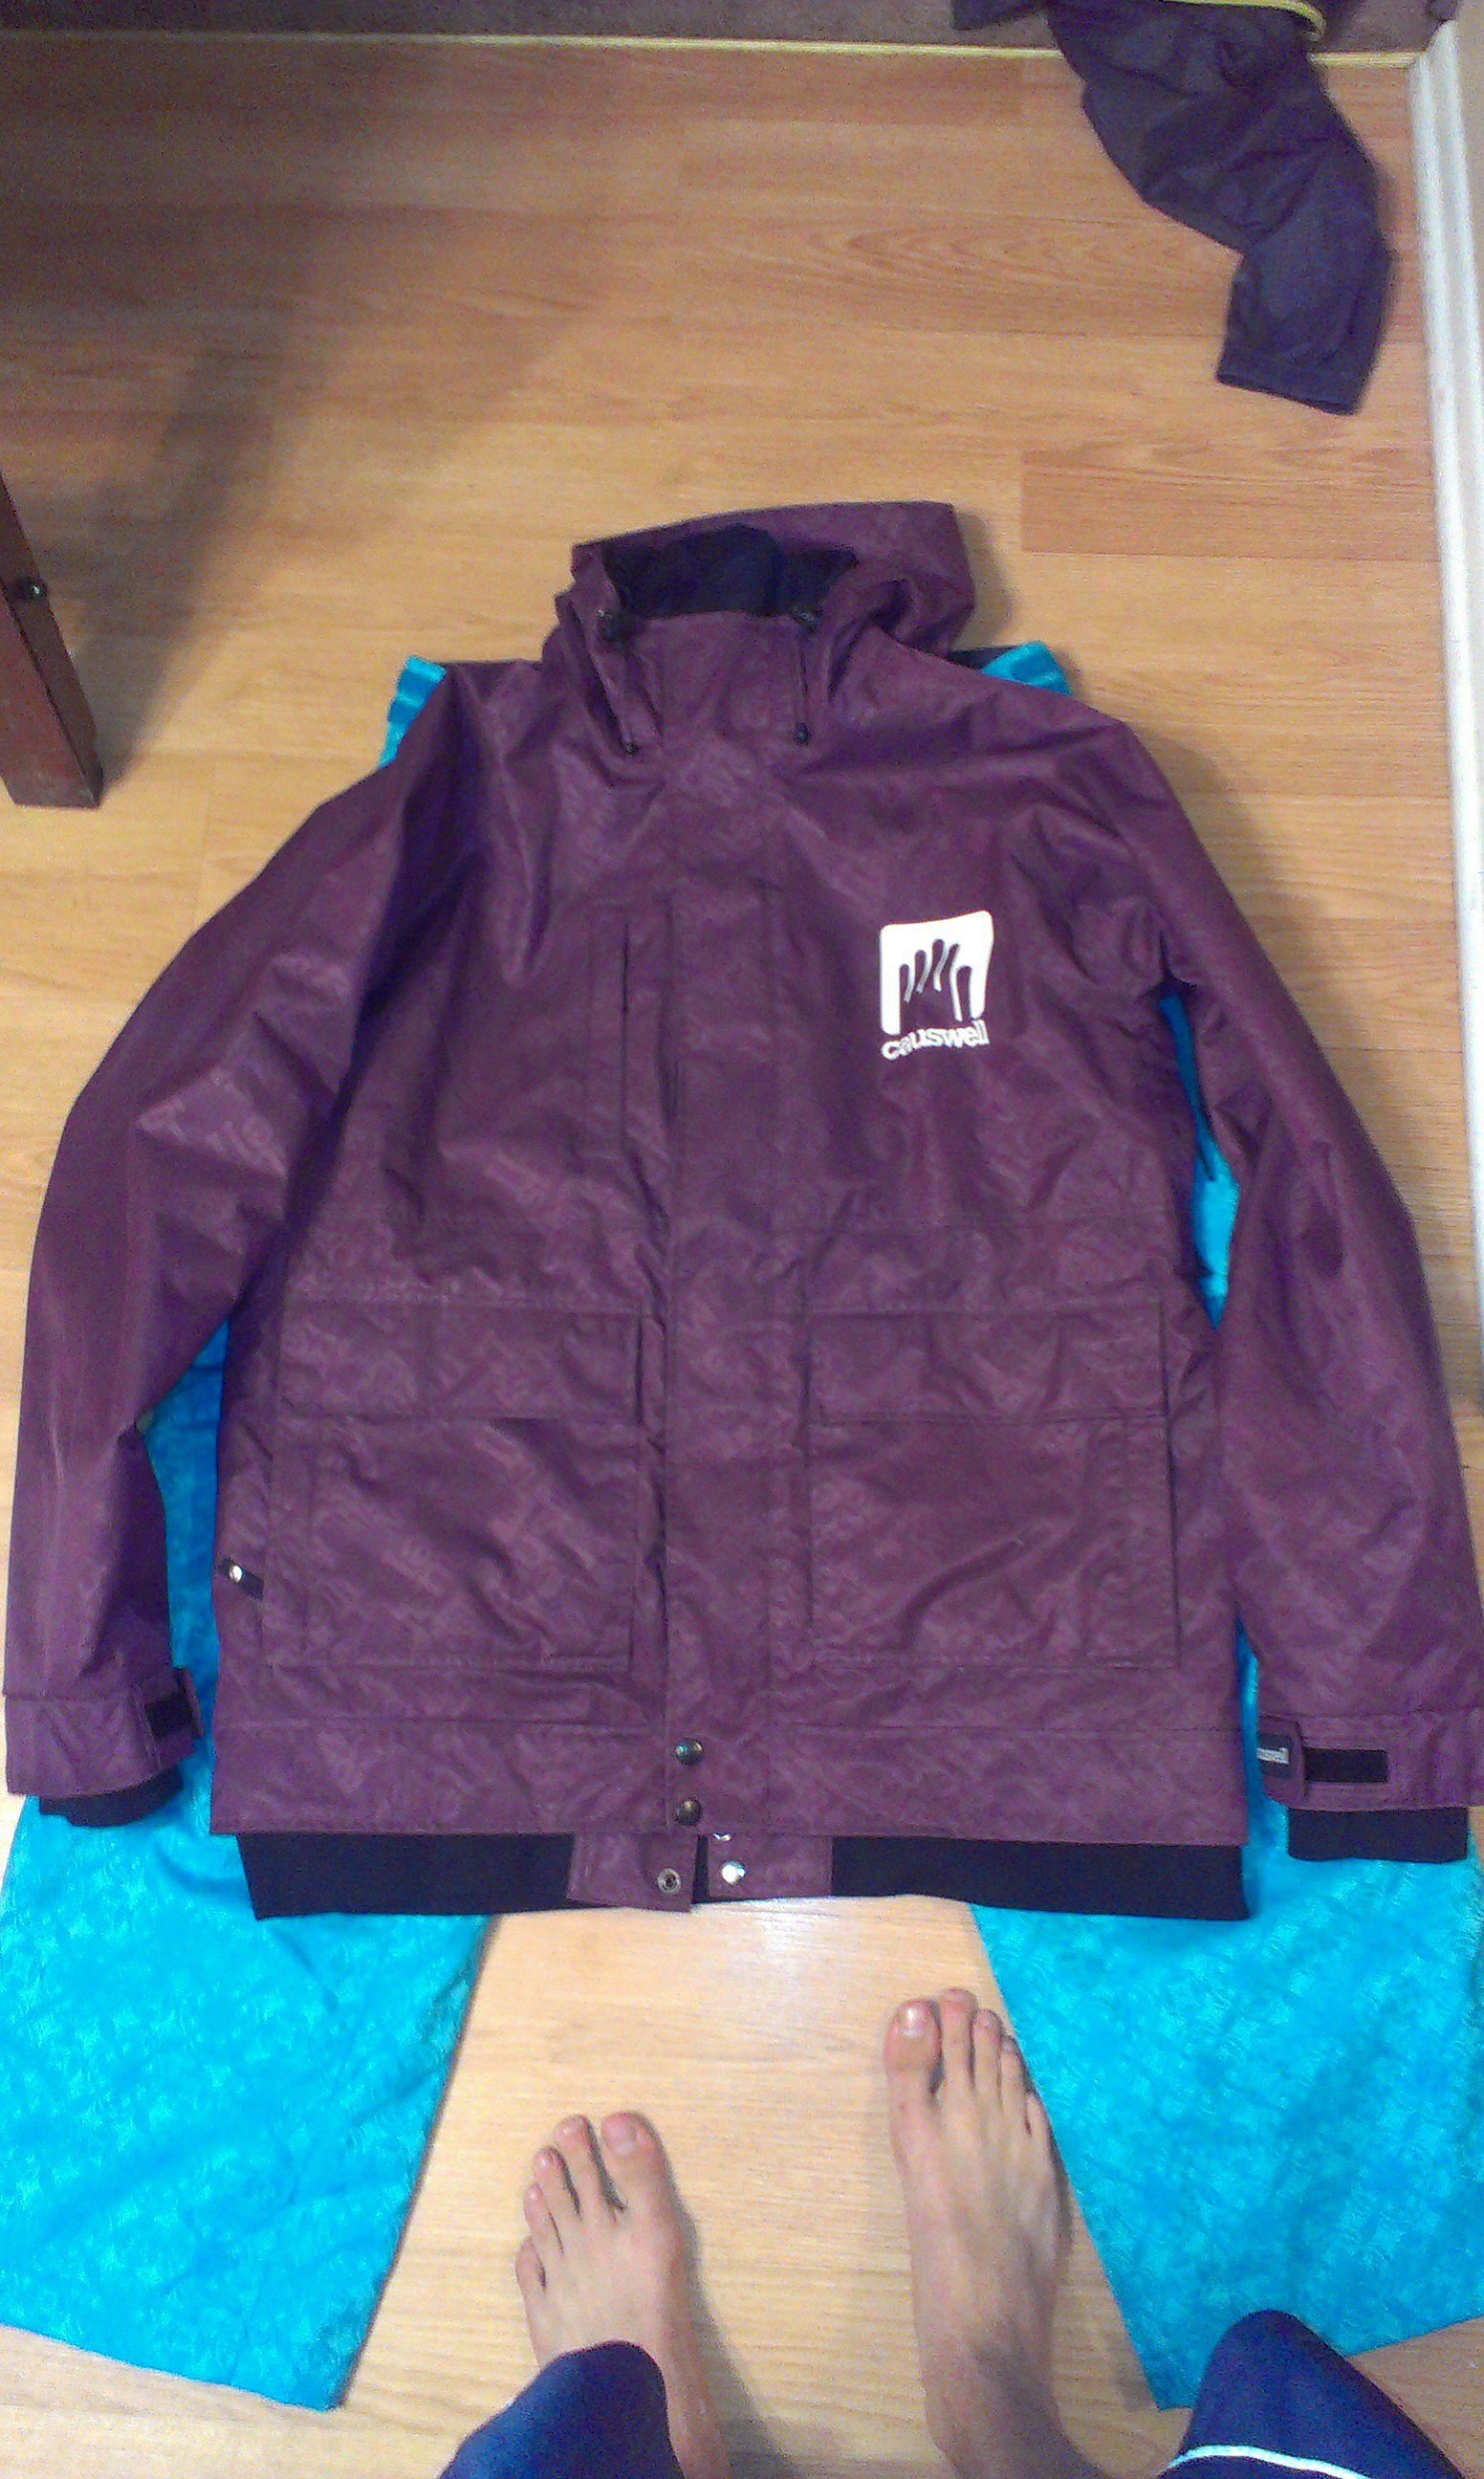 causwell jacket